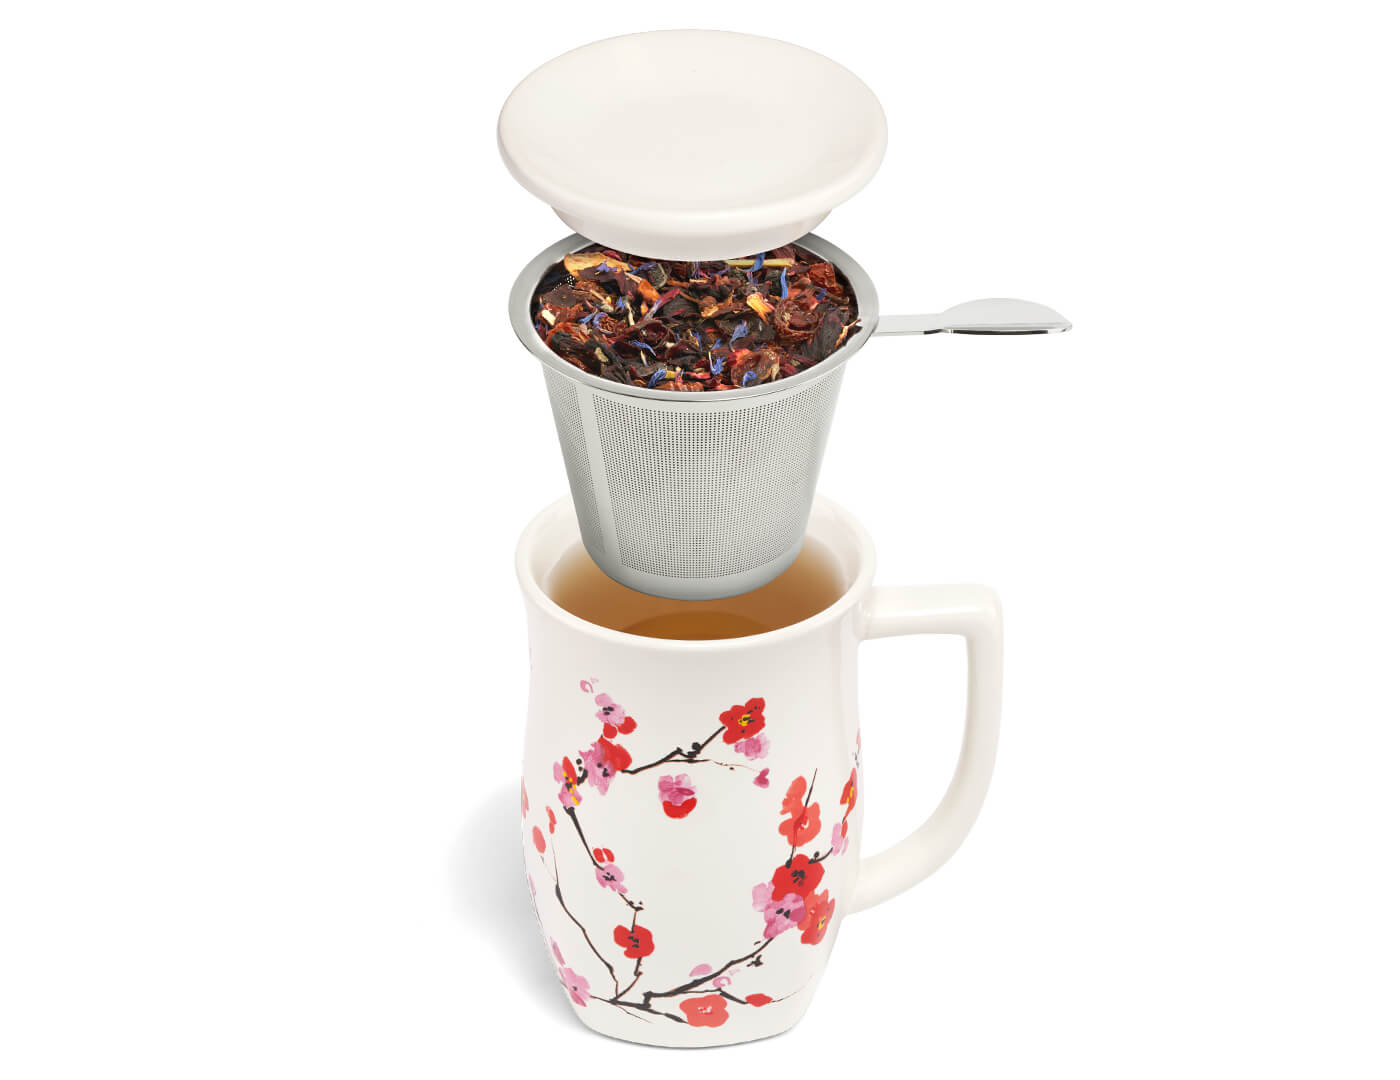 Fiore Sakura Steeping Cup with lid and infuser shown